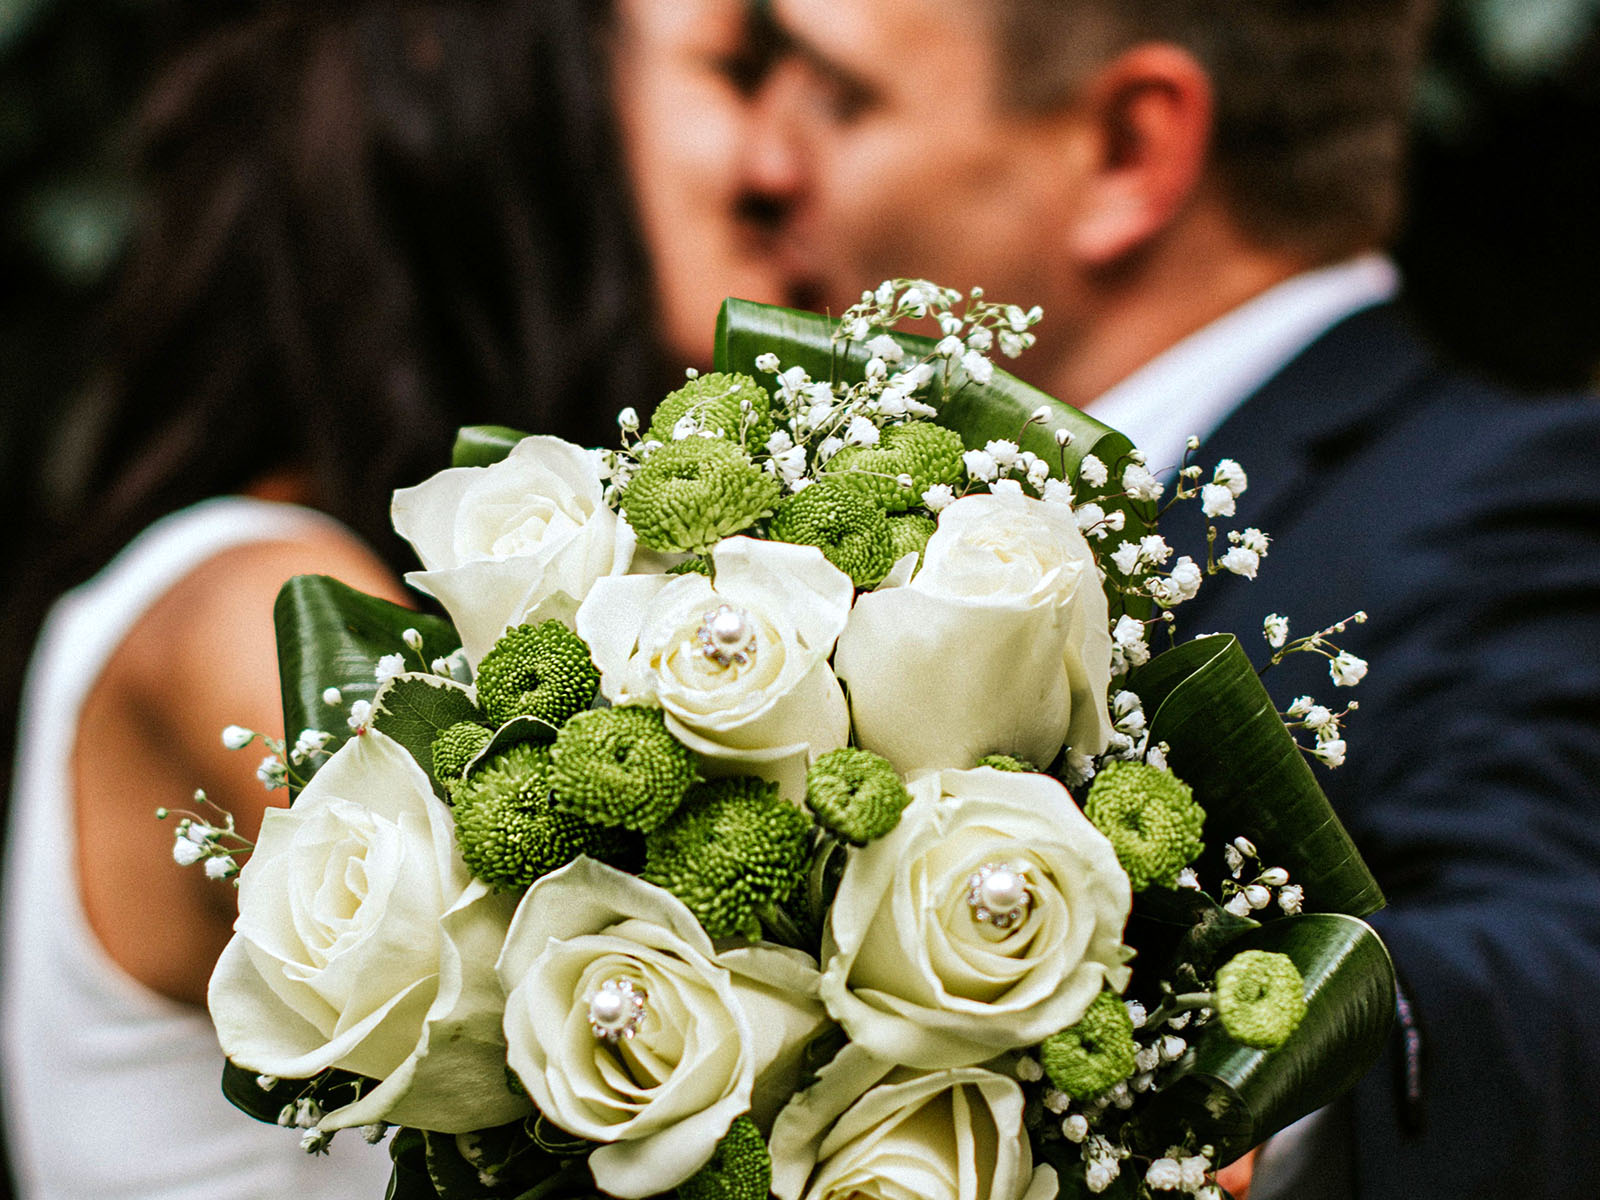 How to Choose the Right Flowers for Your Wedding Bouquet